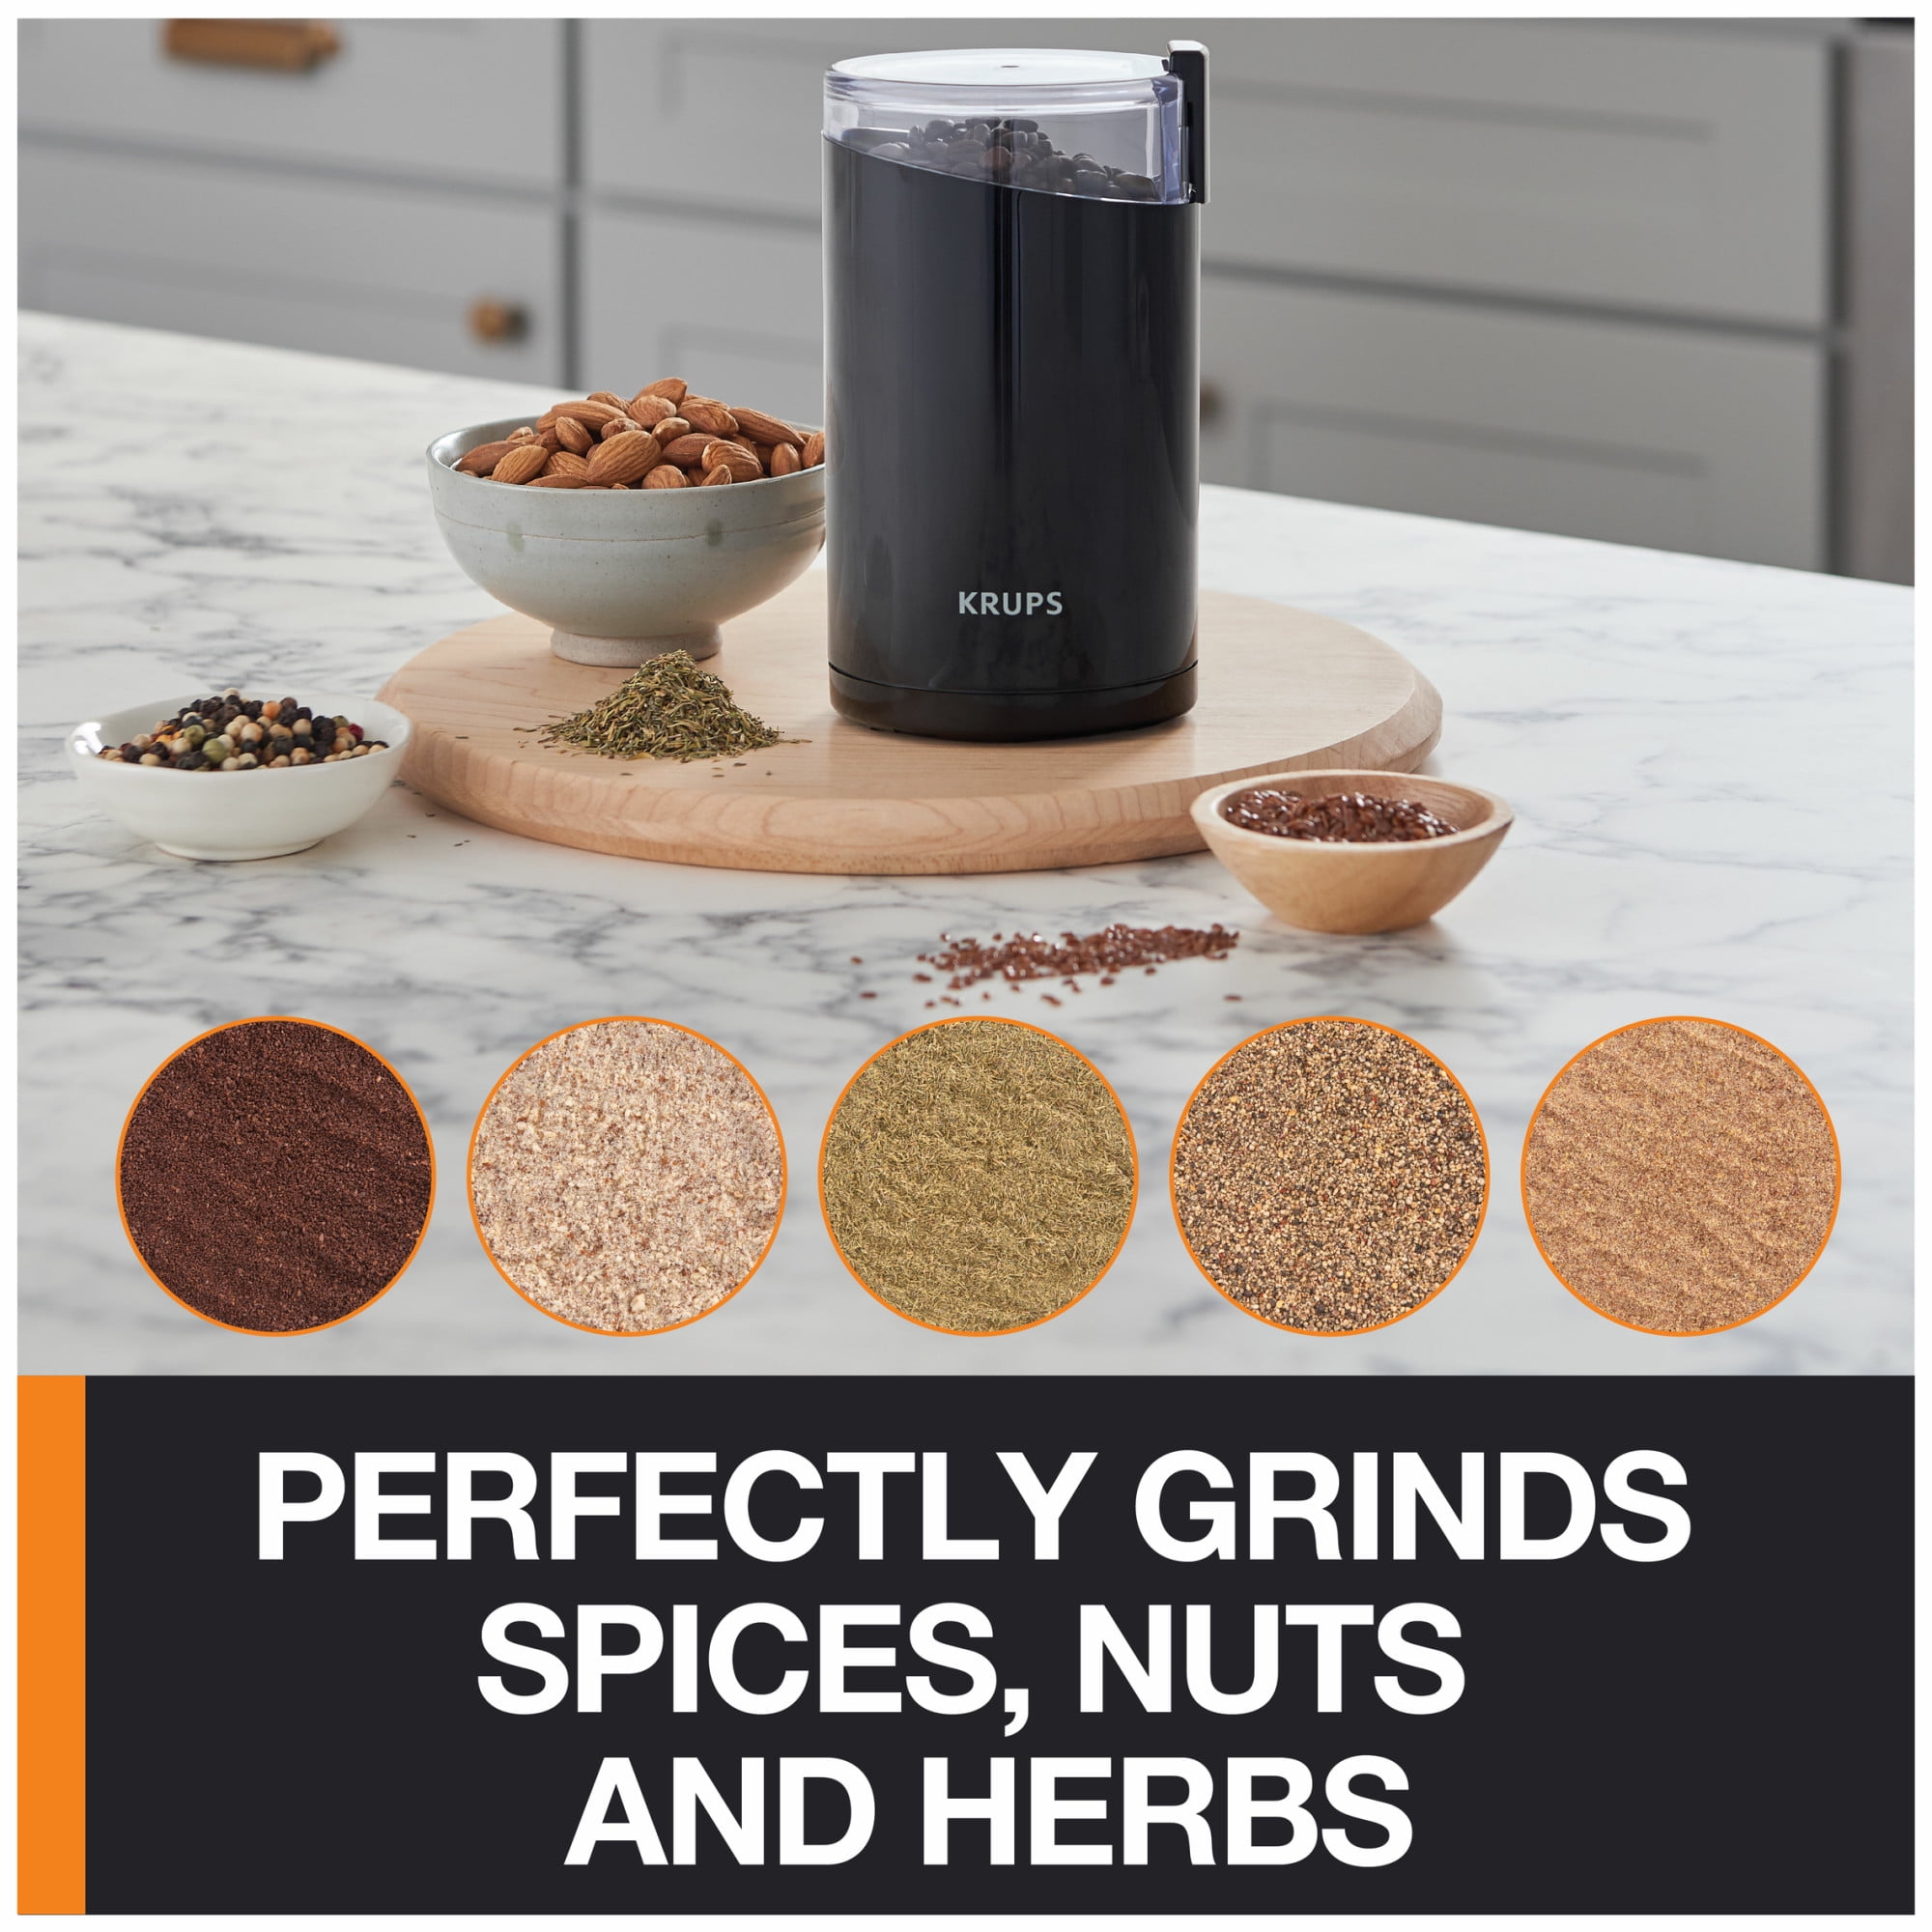 Krups 8 oz. Black Precise Burr Coffee Grinder with Programmable Settings  GX550850 - The Home Depot